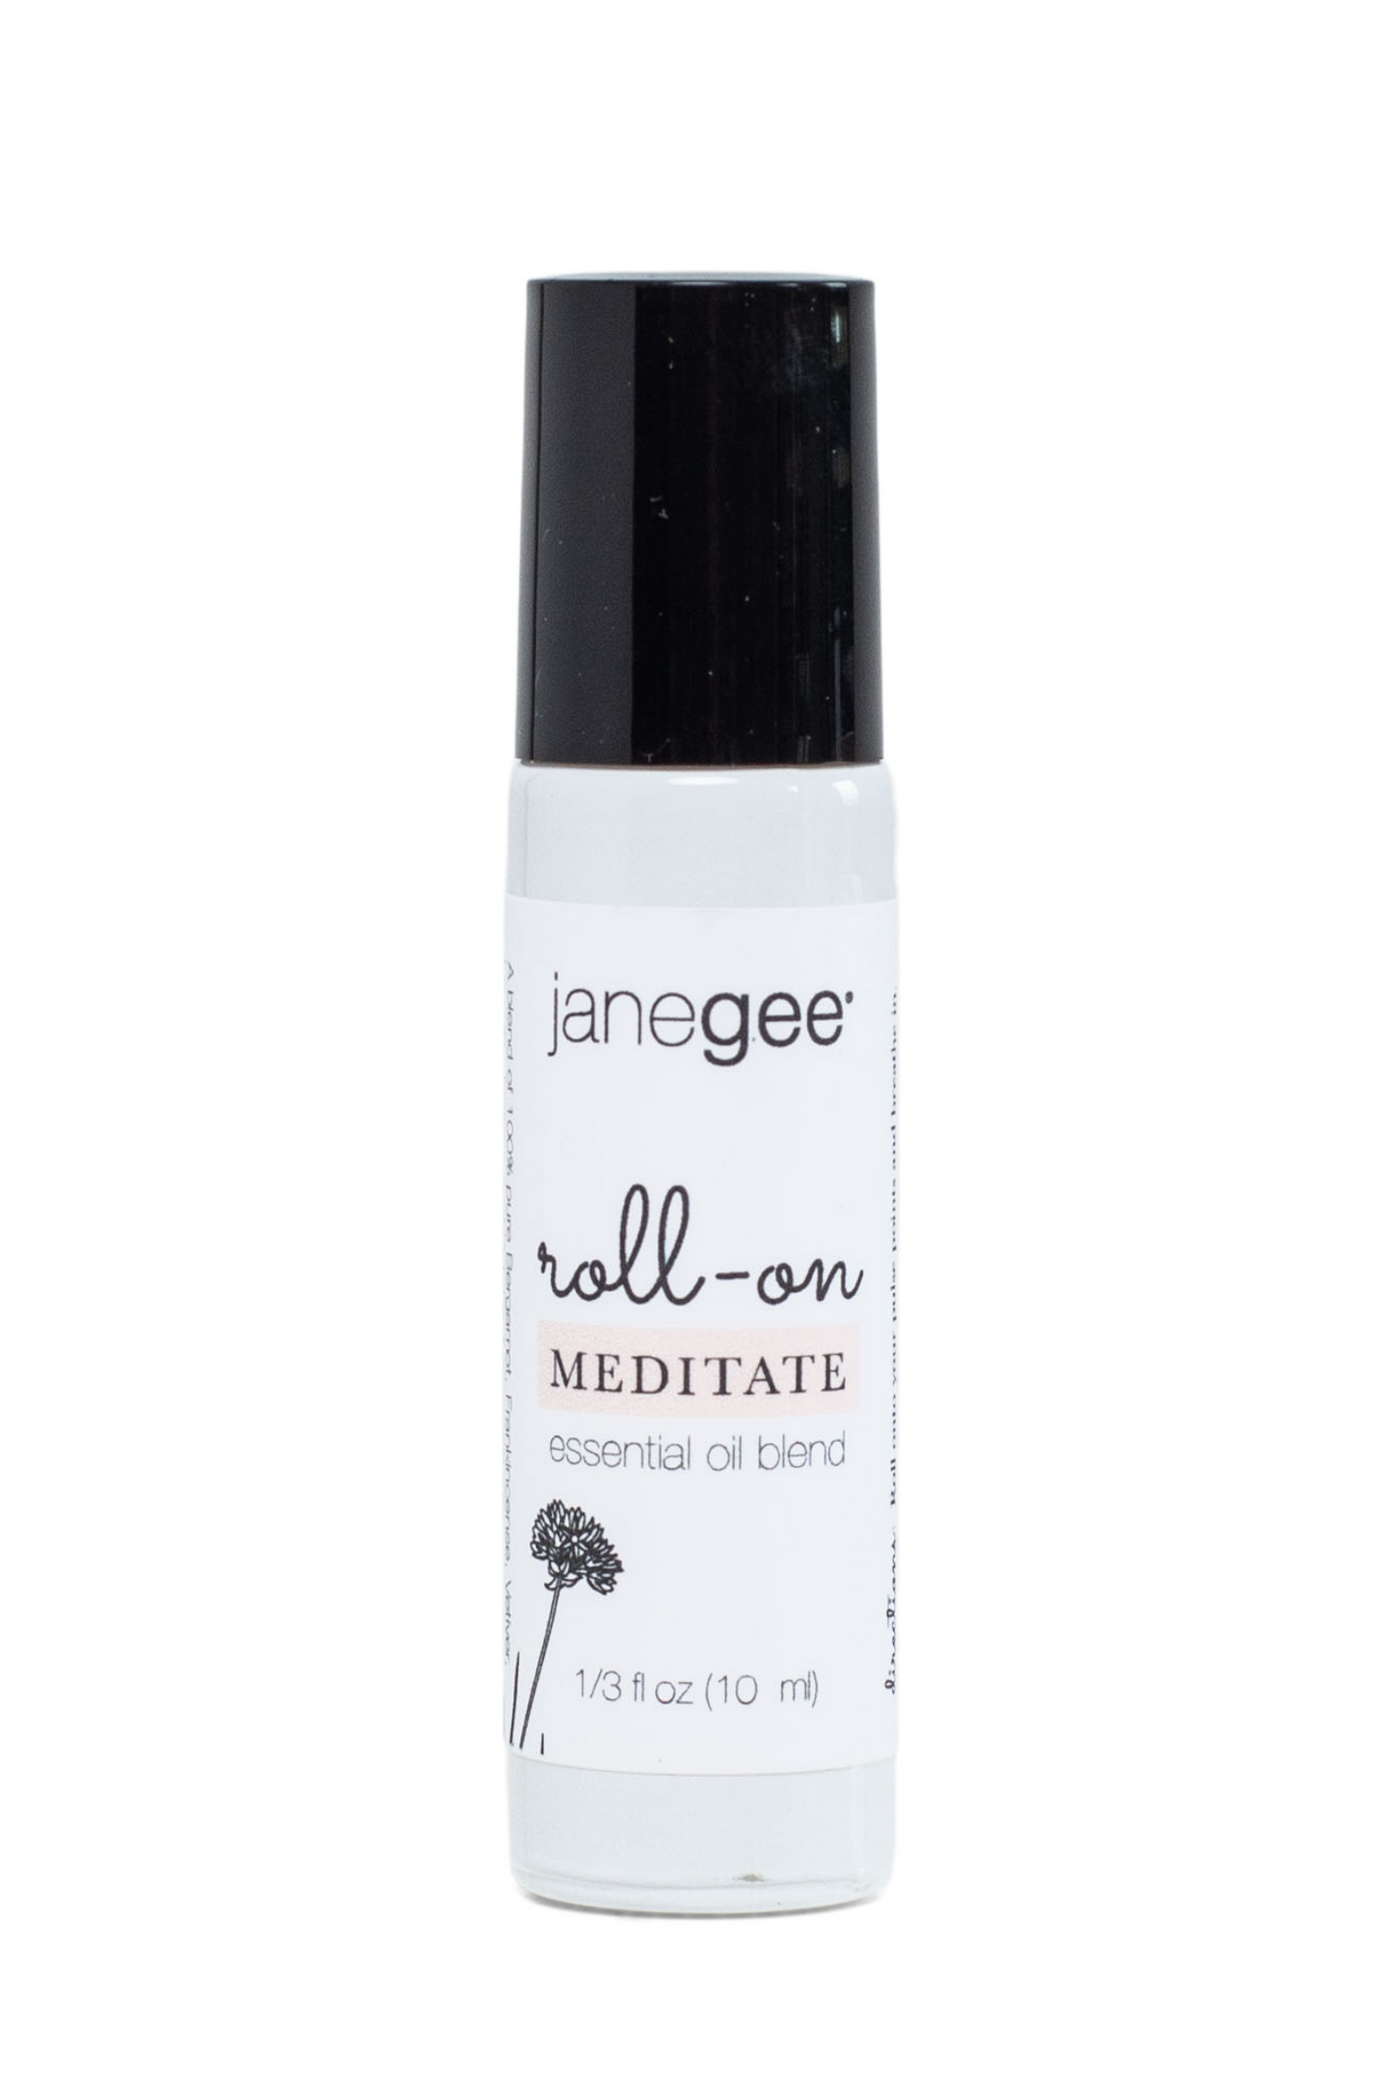 janegee Meditate Aromatherapy Roll-On